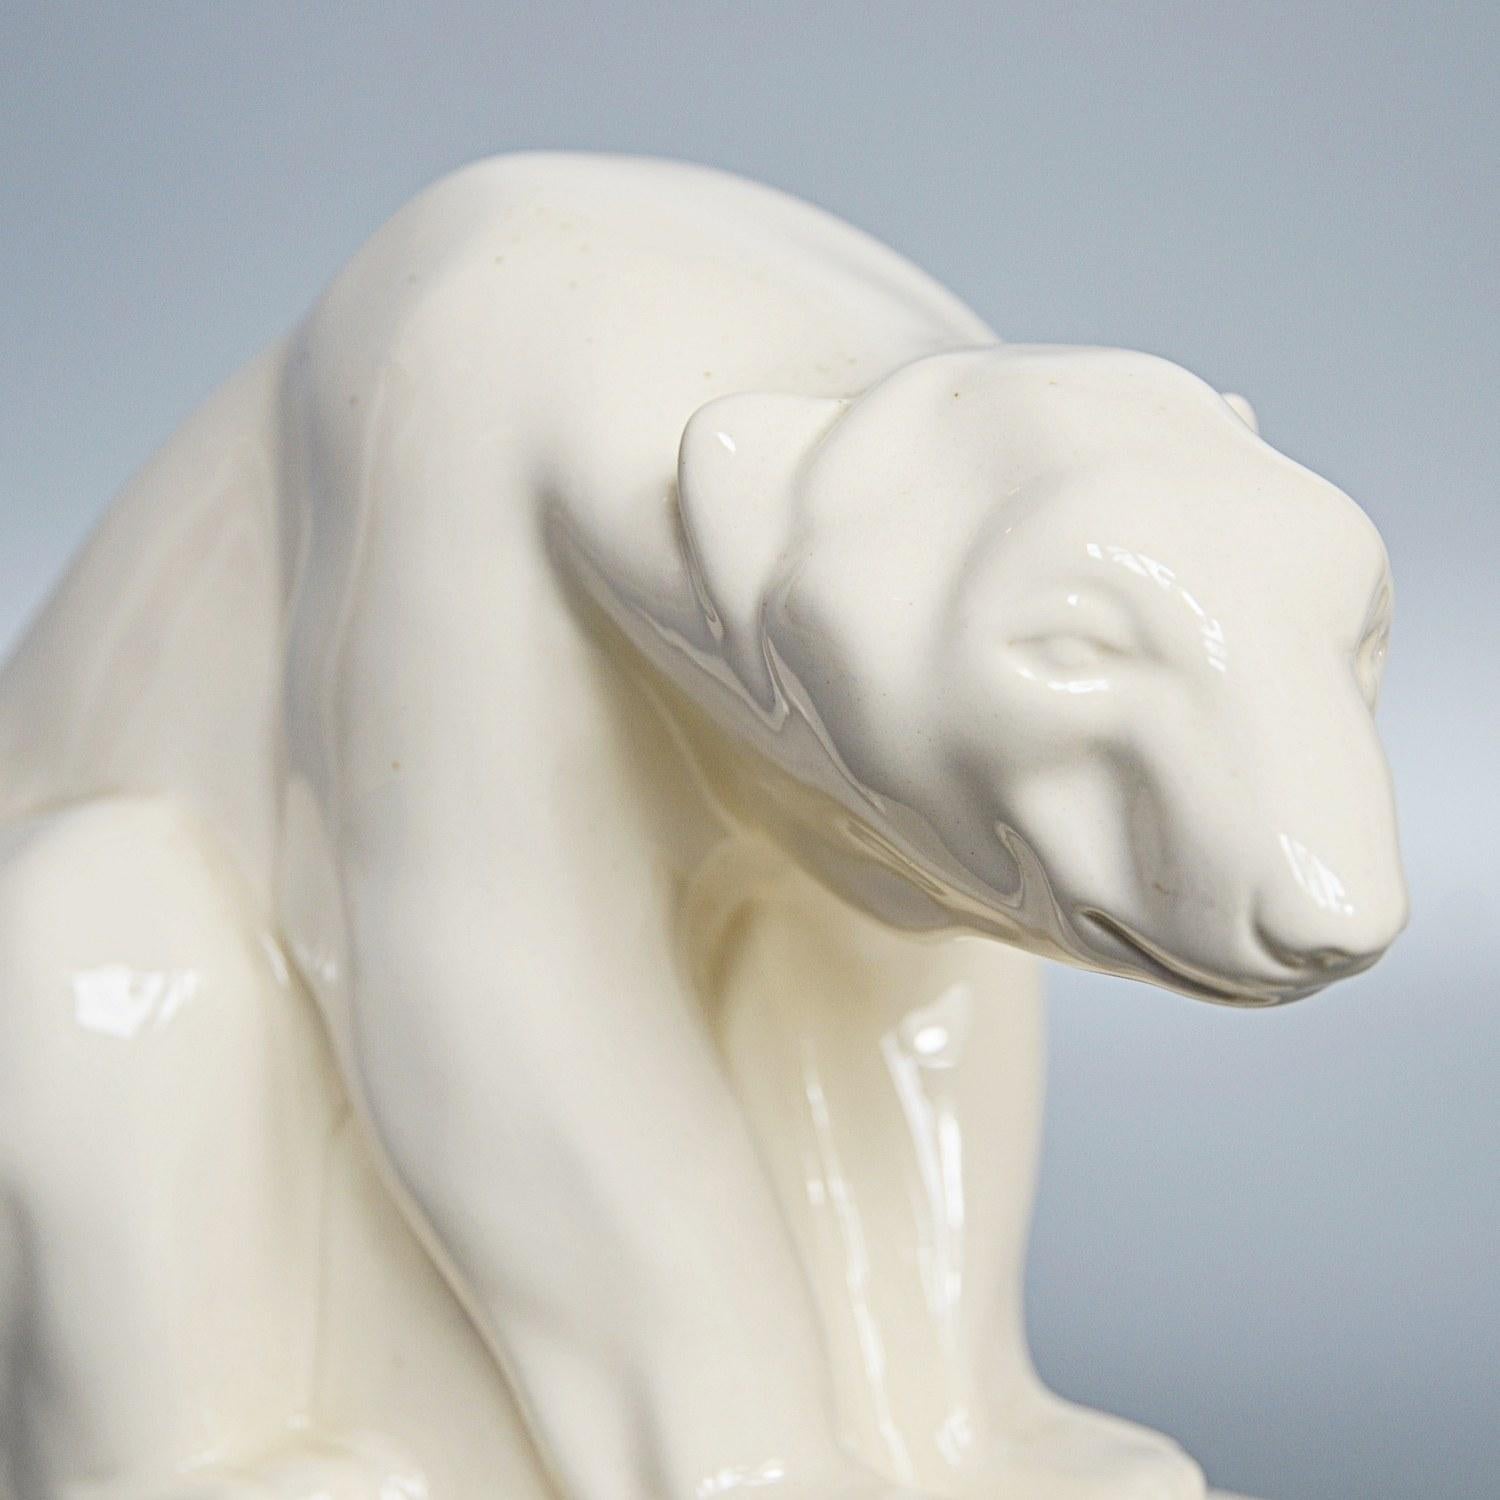 An earthenware model of a polar bear by John Skeaping for Wedgwood. Cream glazed with printed Wedgwood marks to underneath. 

Dimensions: H 18cm, W 24cm, D 18cm 

Origin: English

Date: circa 1960

Item number: 2409203.